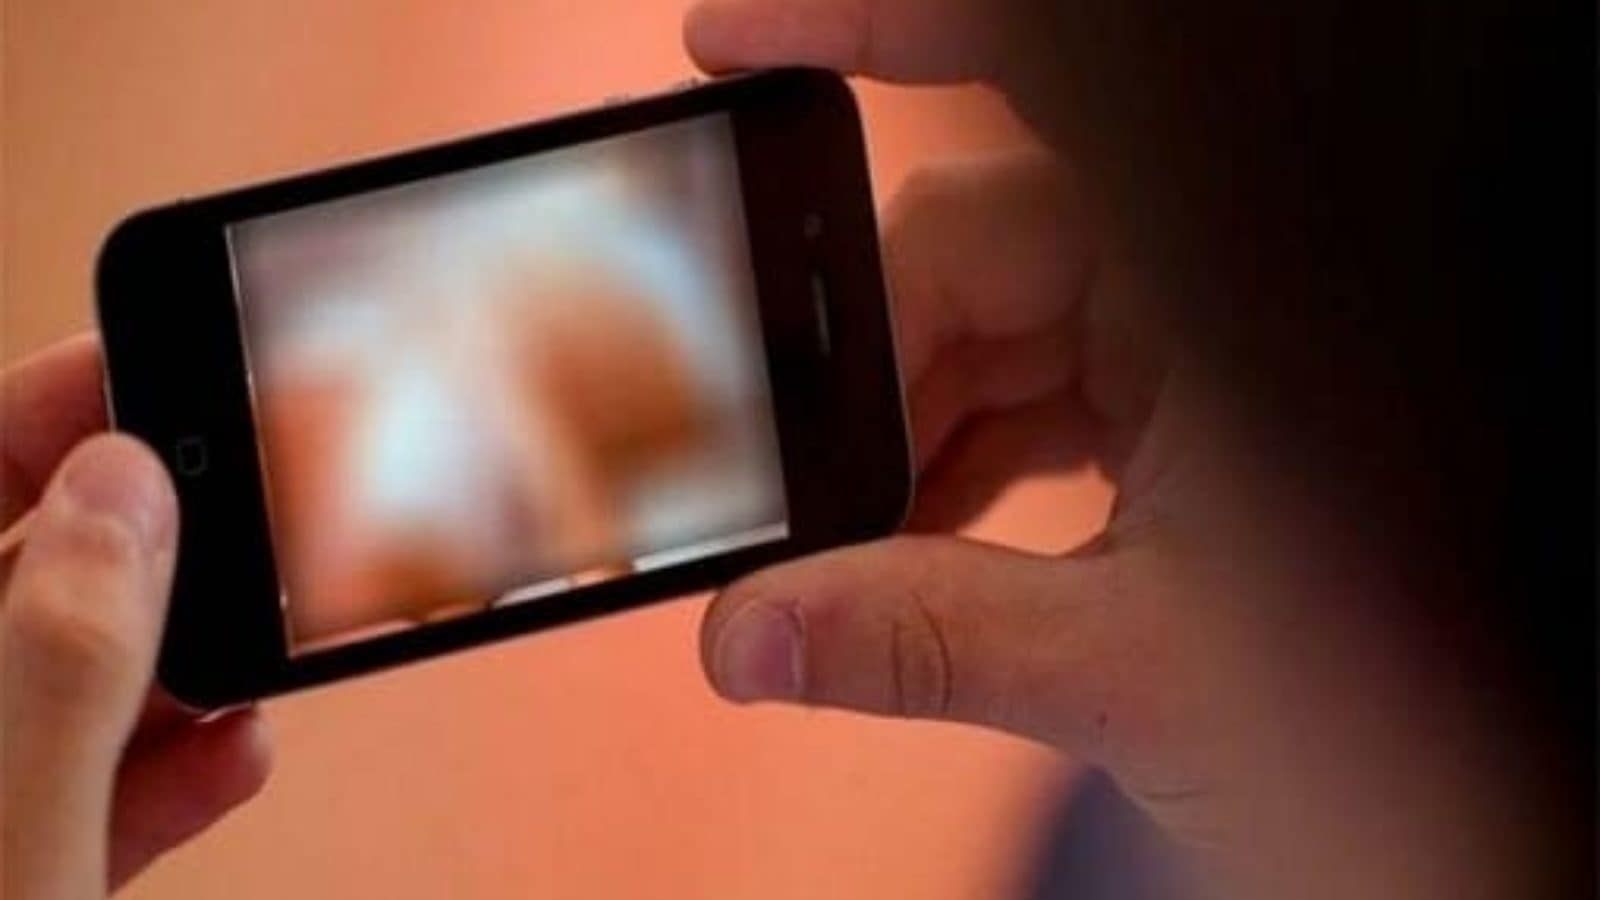 Www Maharashtra School Teachers Sexes Video Marathi - Porn Video Plays Out During Online Class in Pune